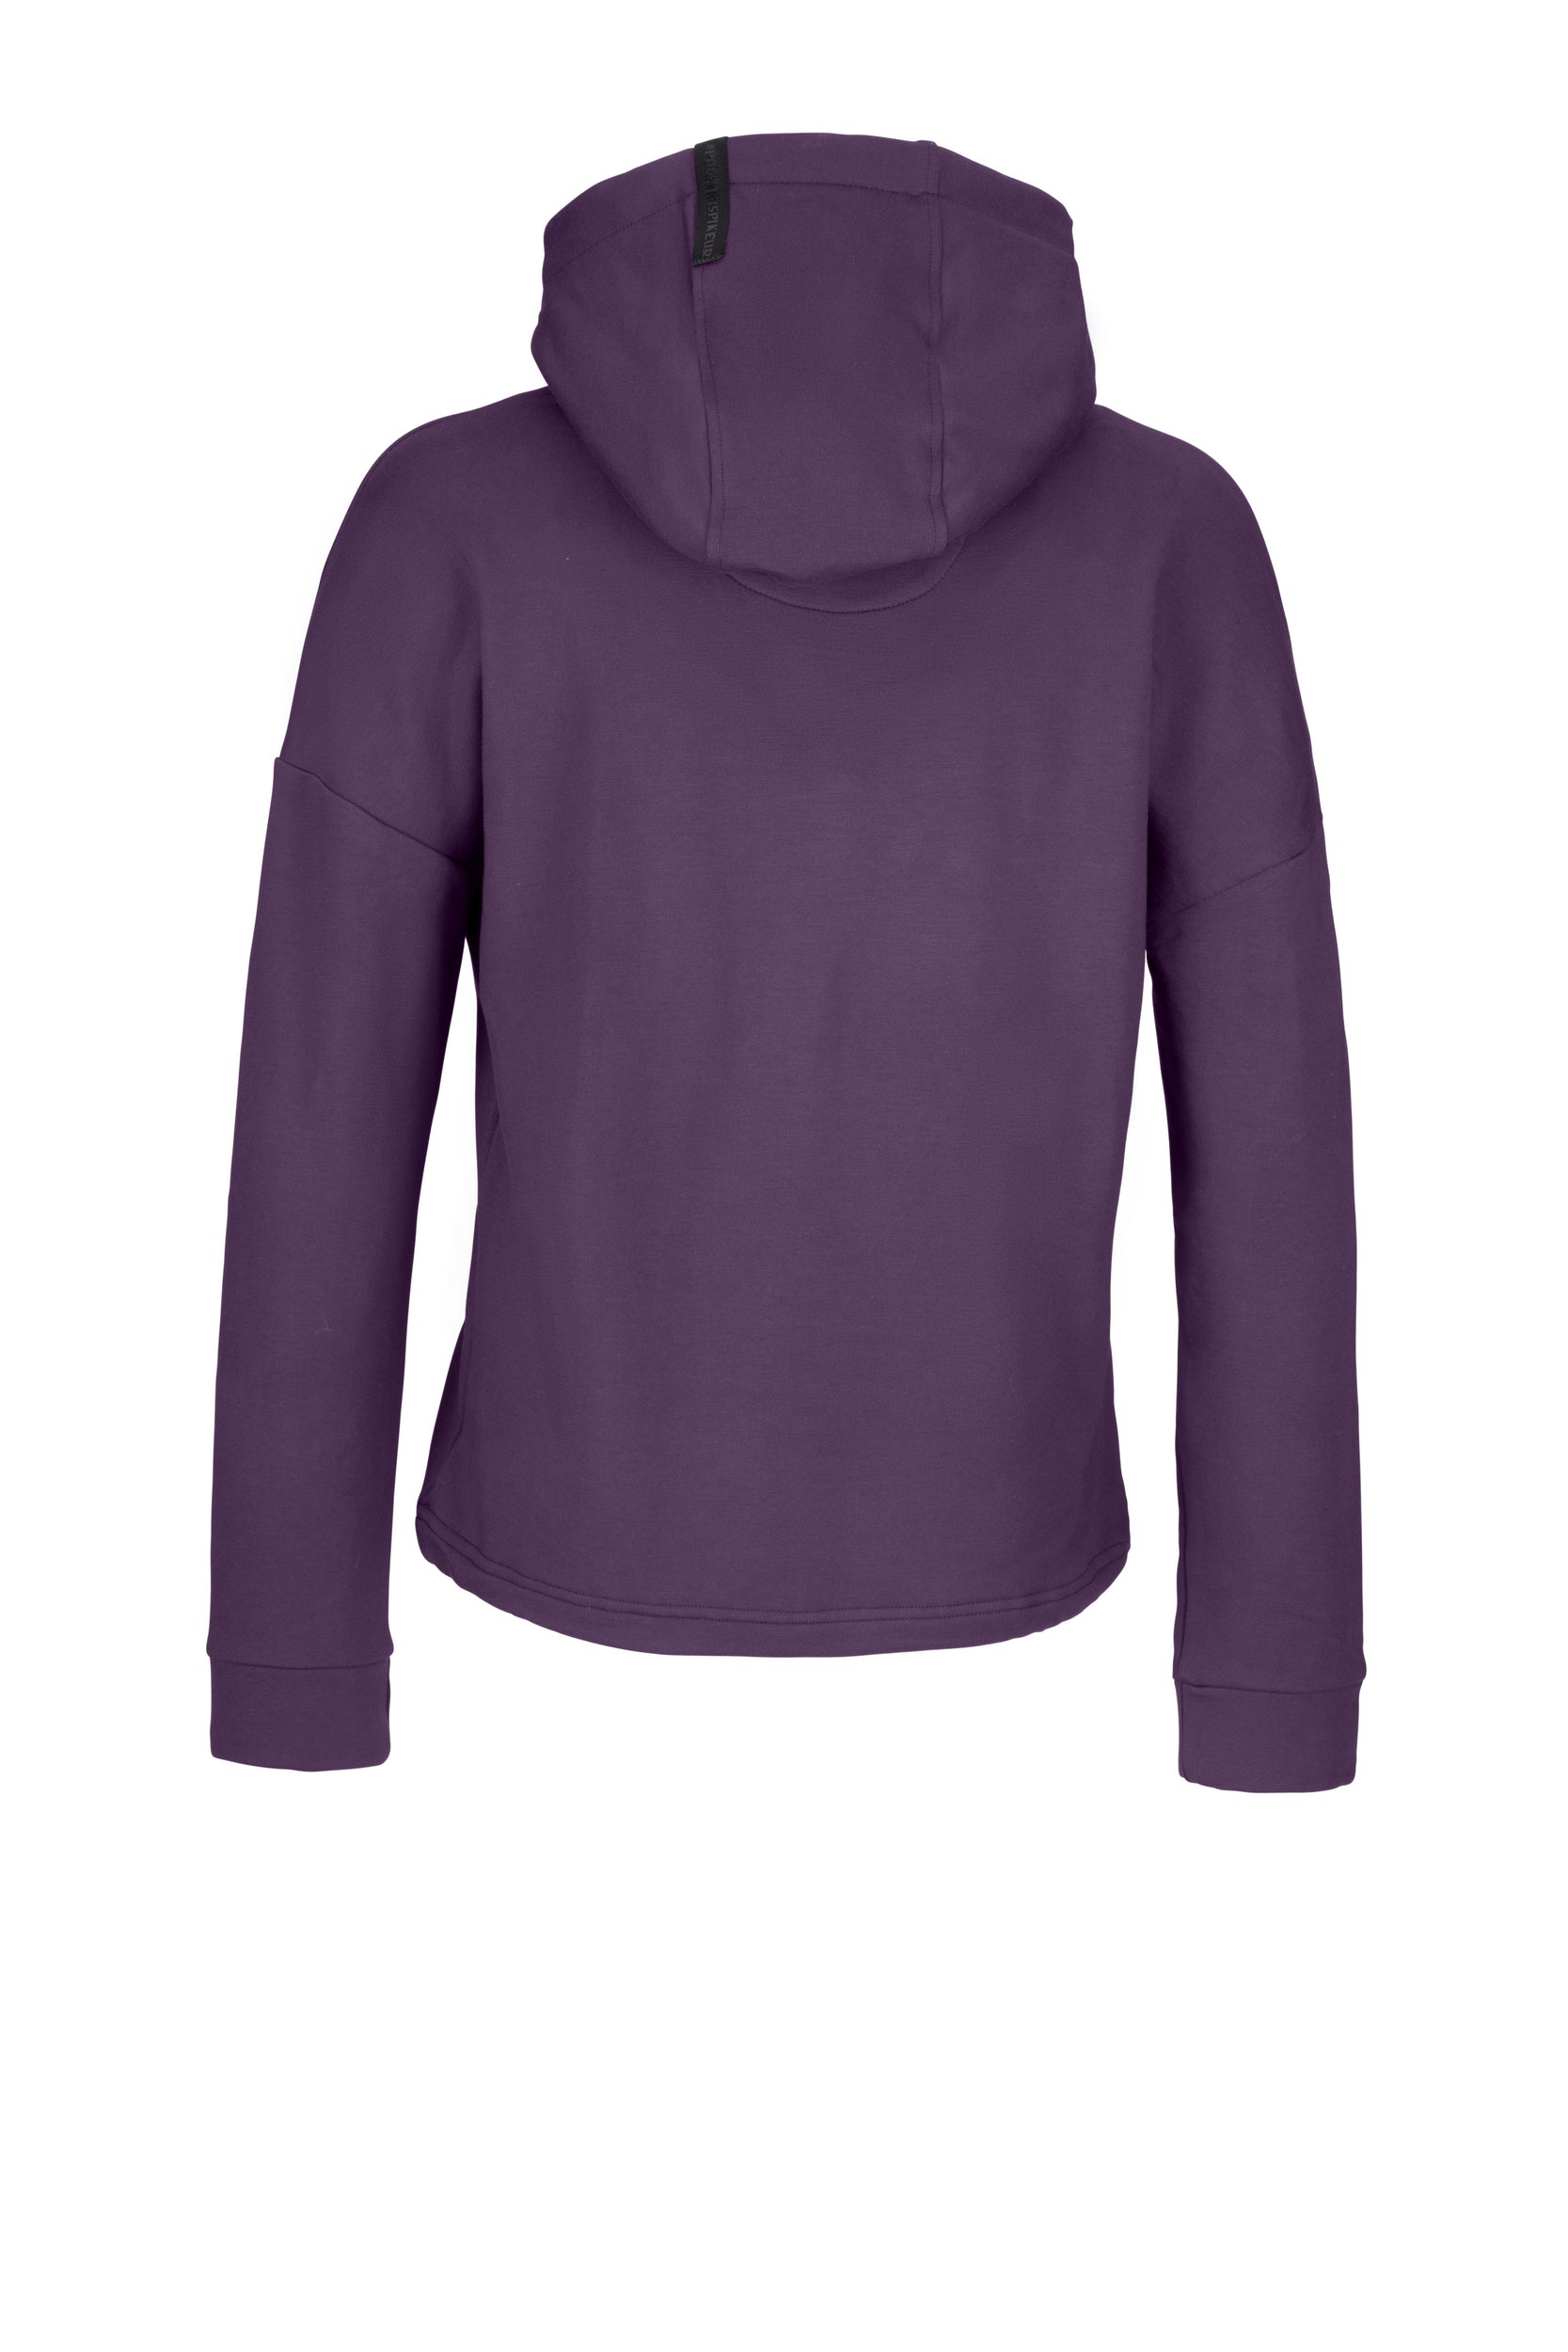 Pikeur sports hoody in blueberry